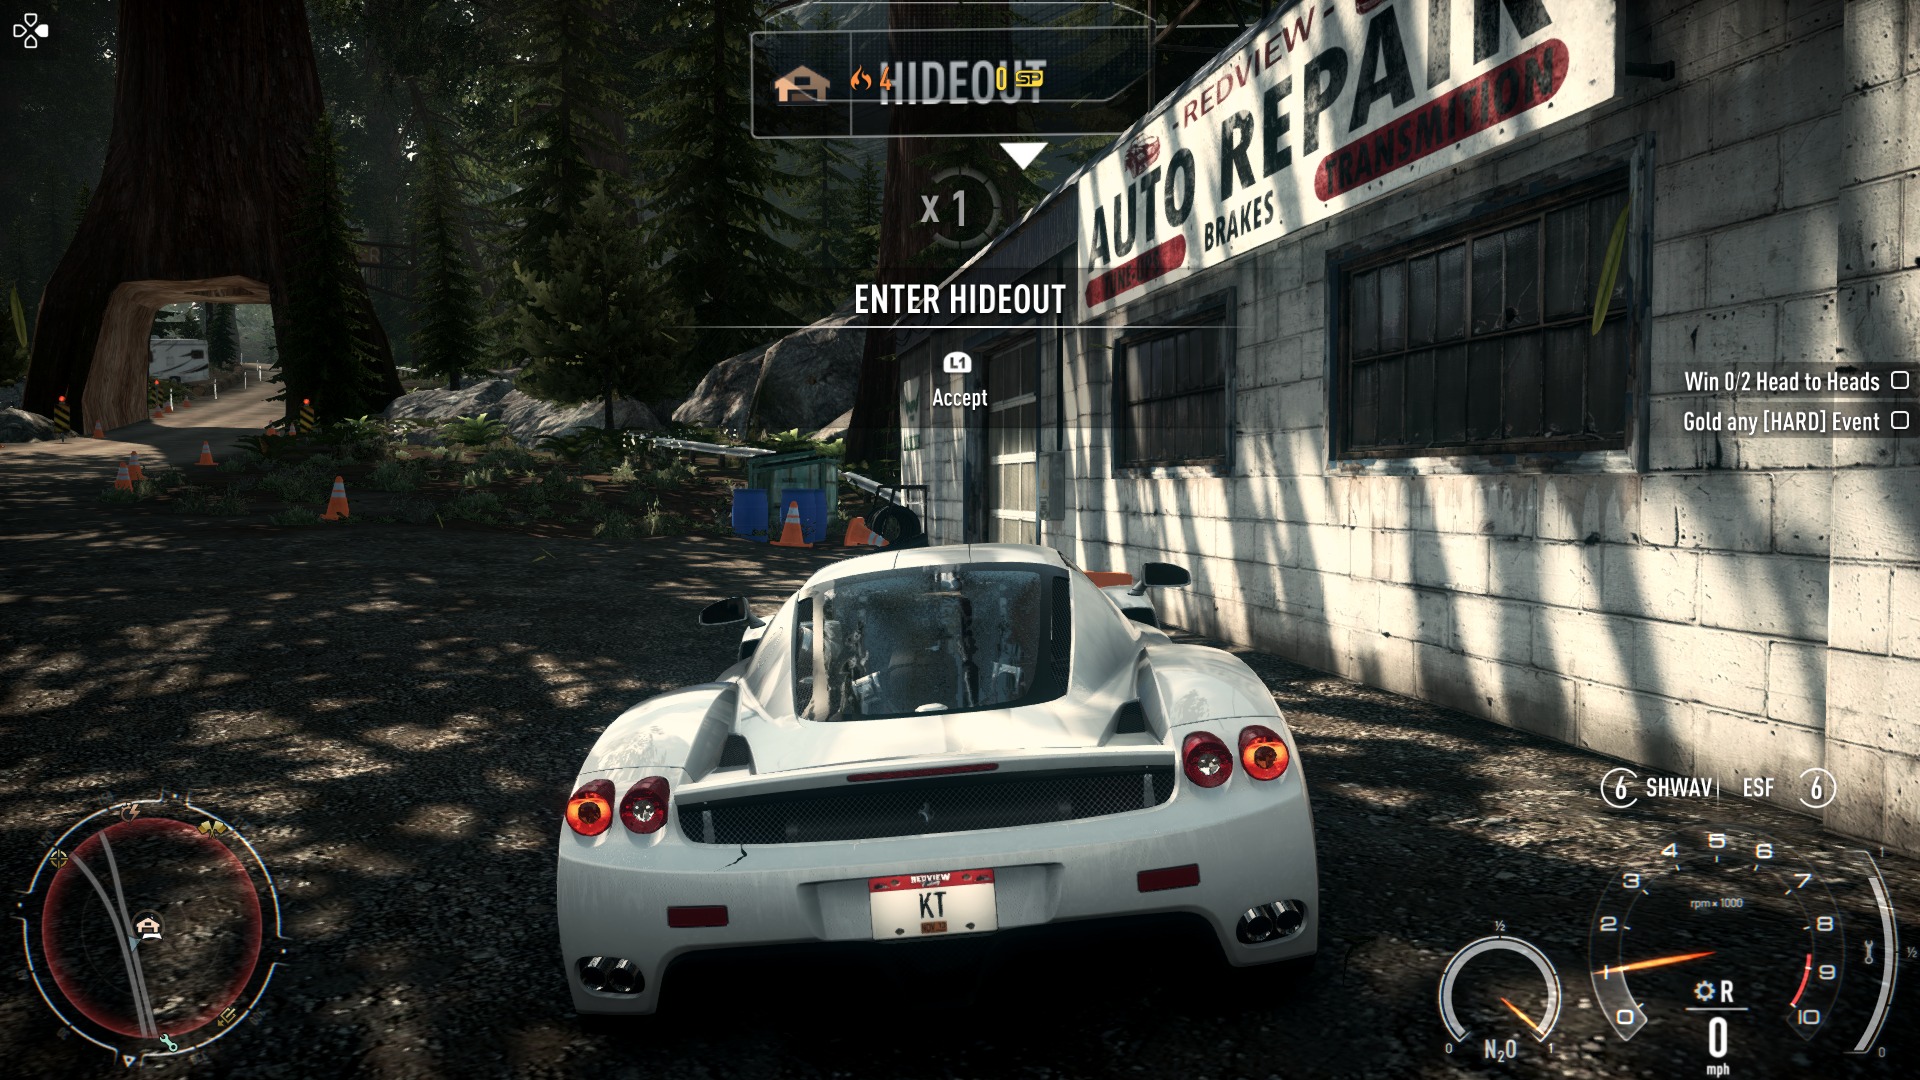 Rivals ps4. NFS Rivals ps4. Need for Speed Rivals PLAYSTATION 4. Игра NFS Rivals (ps4). NFS Rivals ps4 русская.